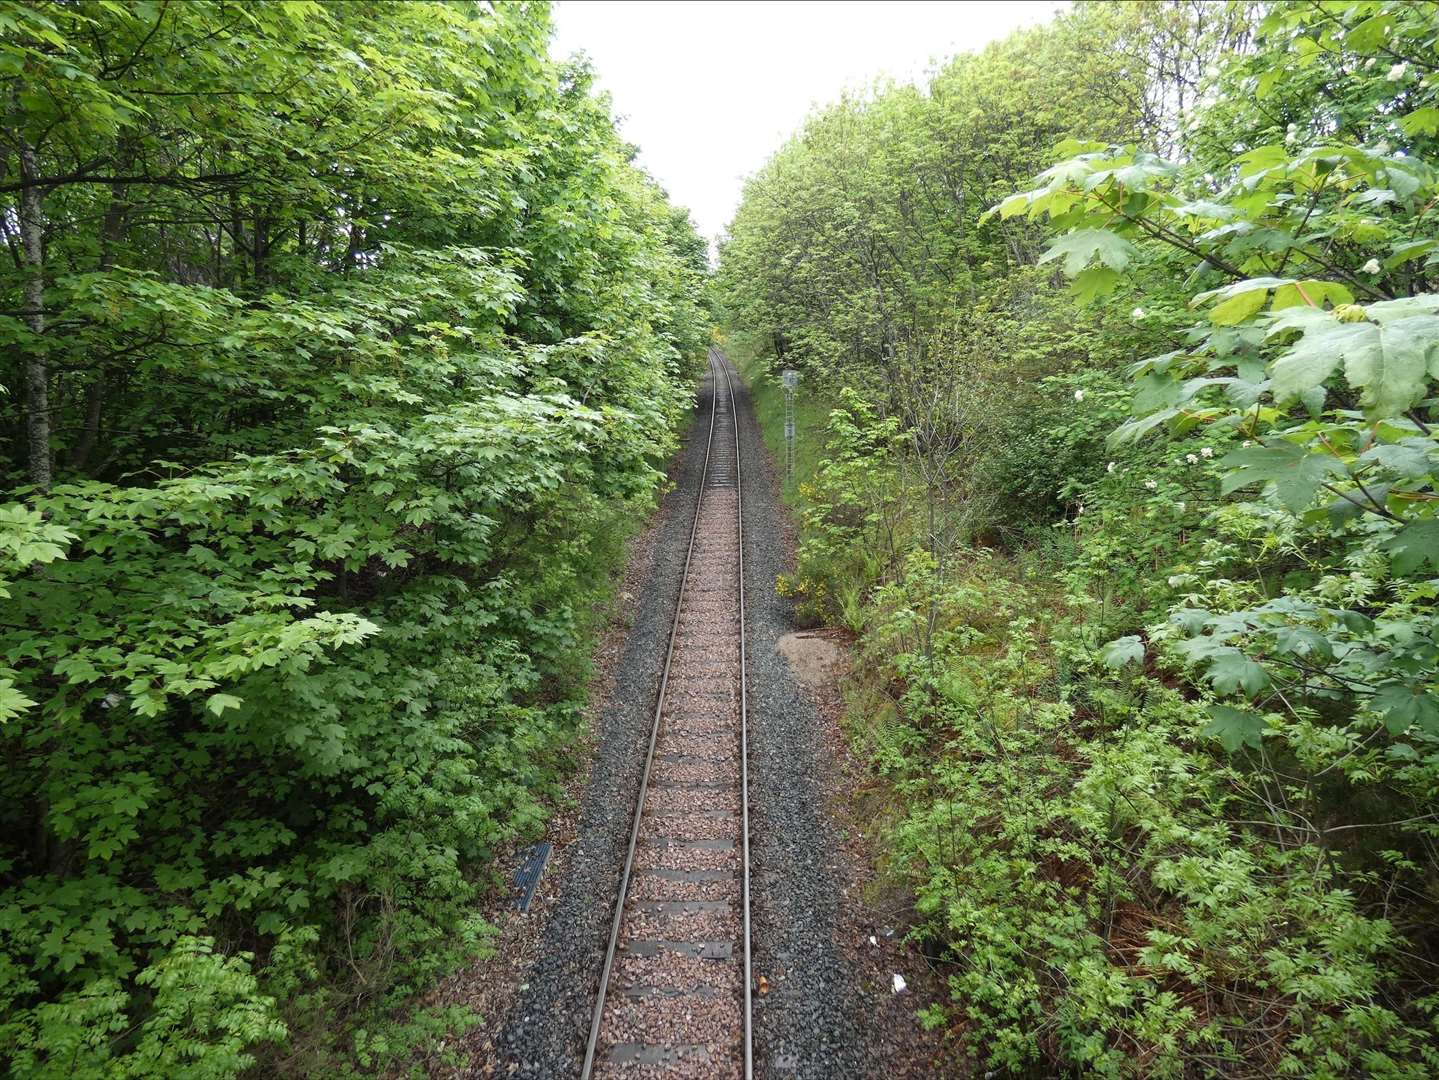 Network Rail will shortly begin overnight tree and vegetation management on the line between Evanton and Invergordon in the Scottish Highlands.